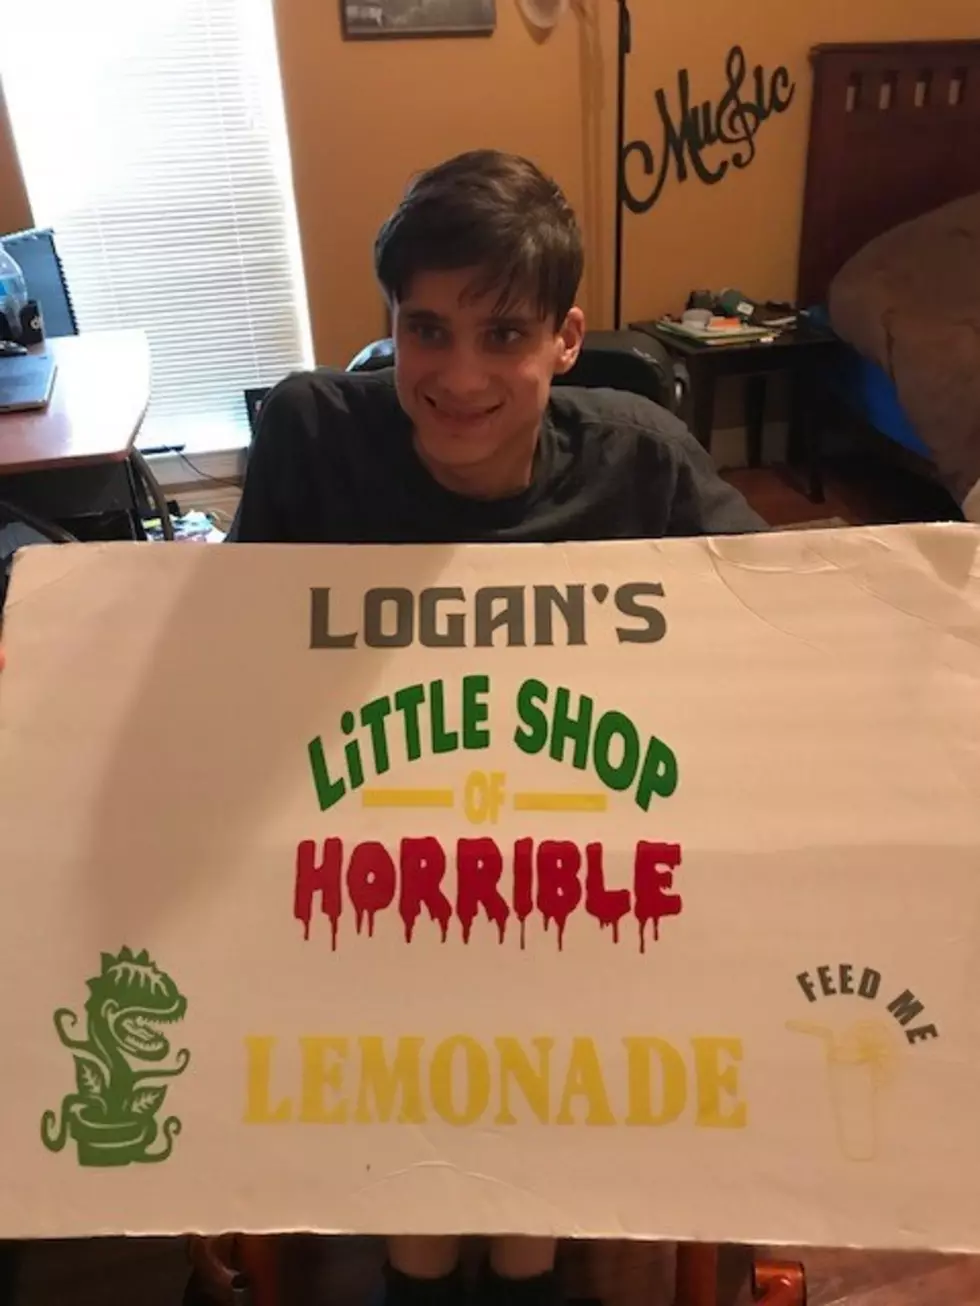 Special Needs Student Needs Your Help Raising Money For CYT ‘Little Shop Of Horrors’ Prop [Photo]